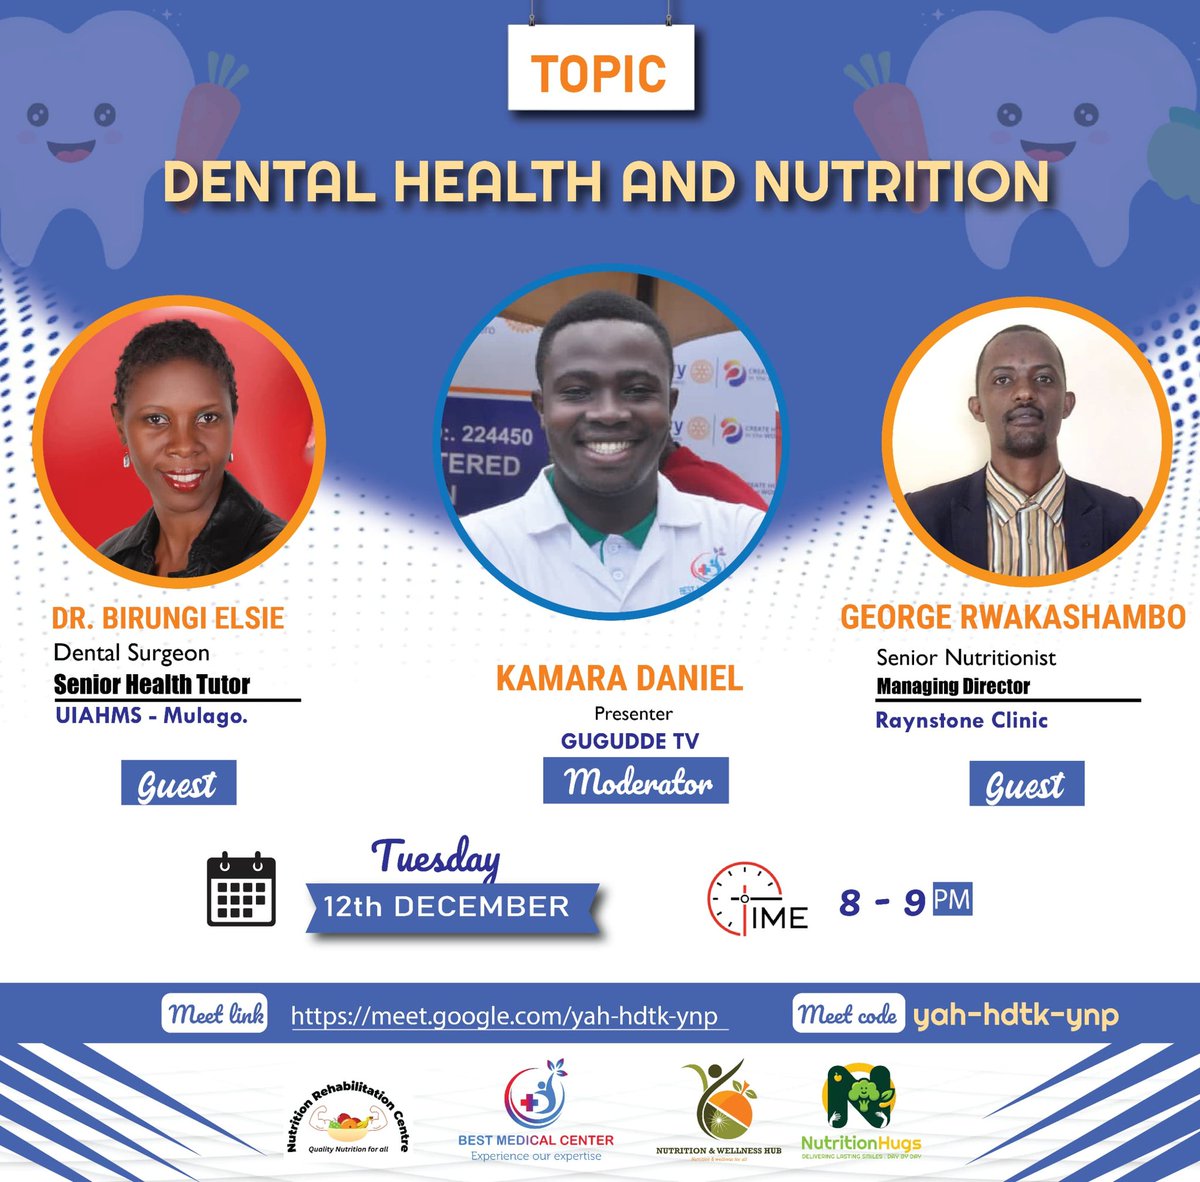 #DentalHealth
#NutritionHealth

Most oral and dental health conditions are preventable and can be treated at early stages

Did you know that Nutrition and Diet are significant in growth, development & maintenance of dental/oral health?

This Tuesday join the Experts in these